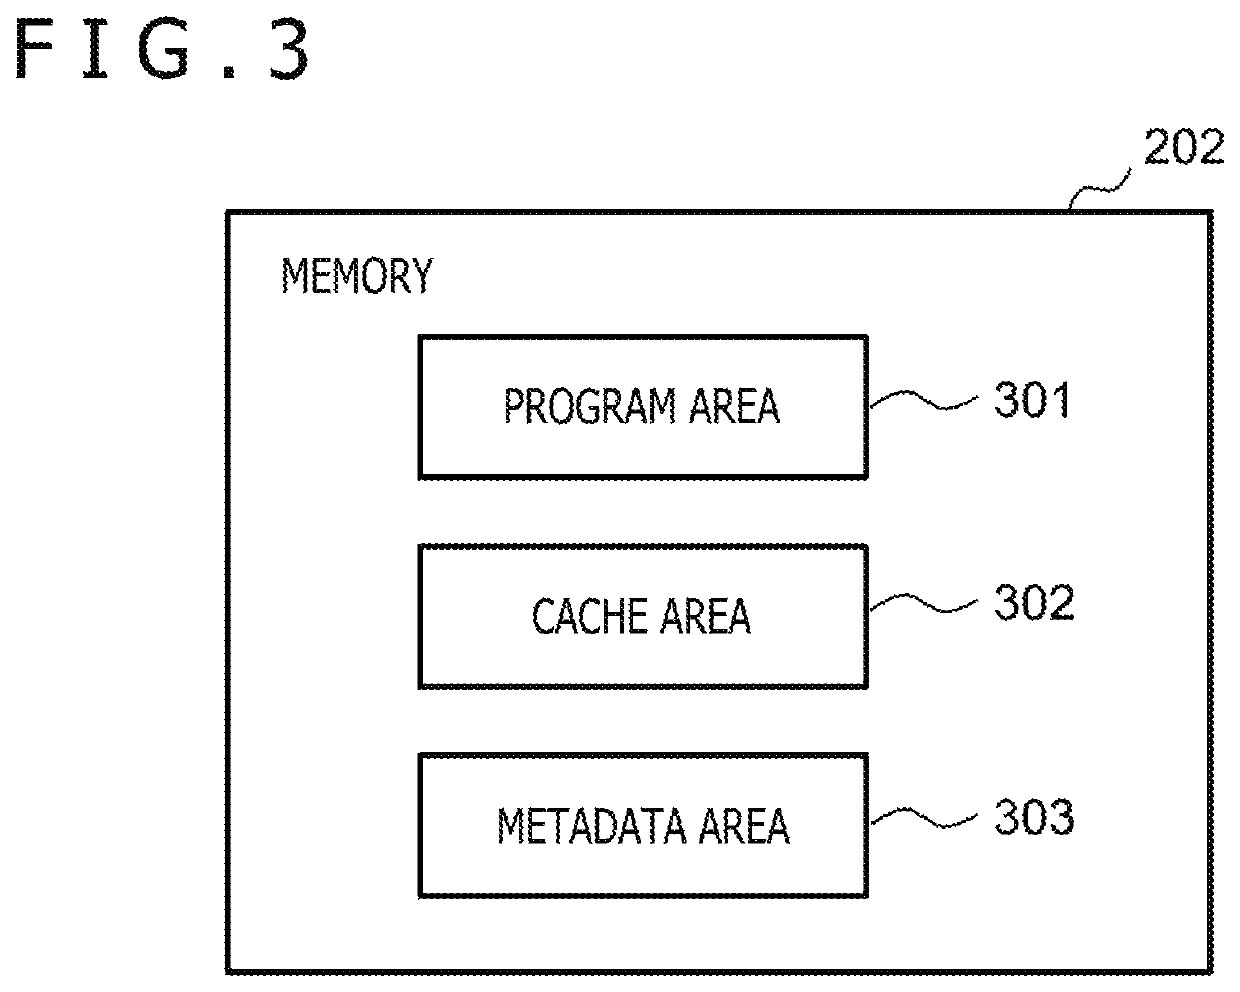 Storage system and controller location method